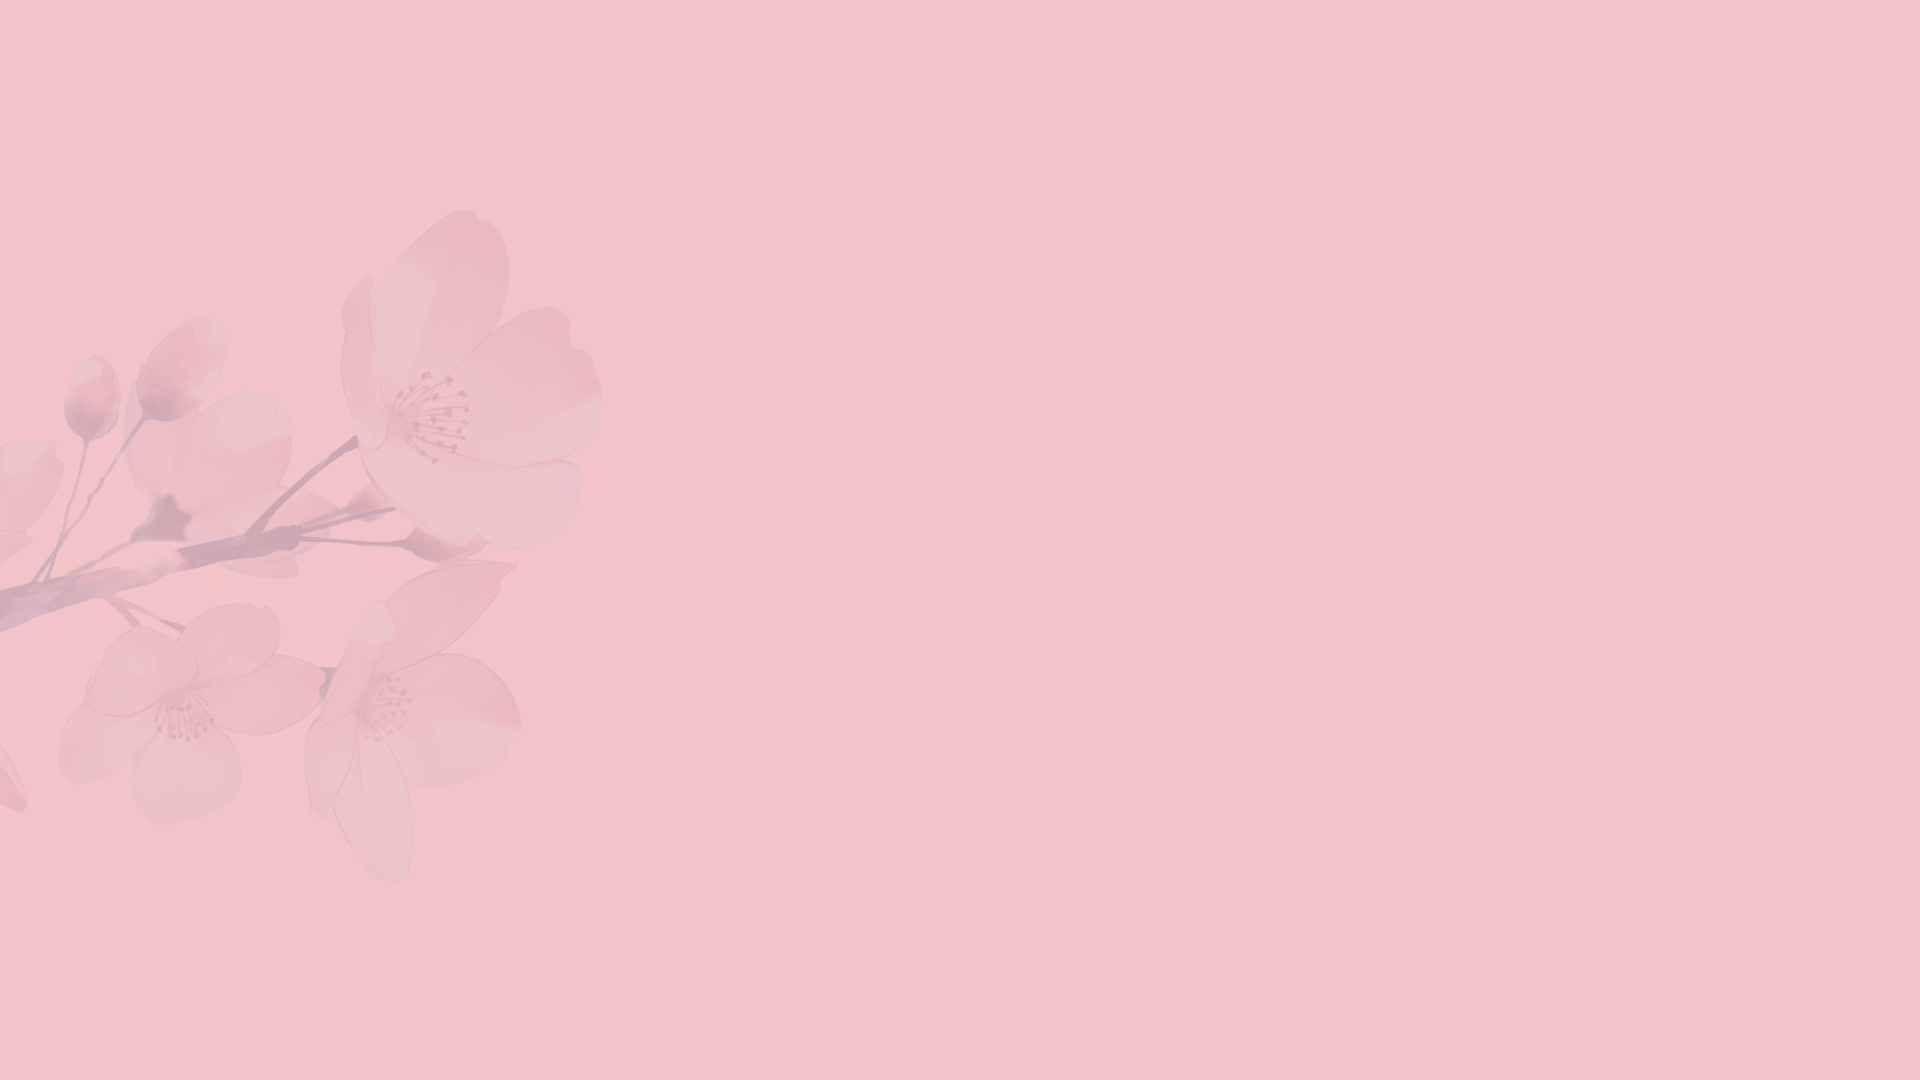 pink background, flowers, cherry blossom, minimalism, simple Gallery HD Wallpaper